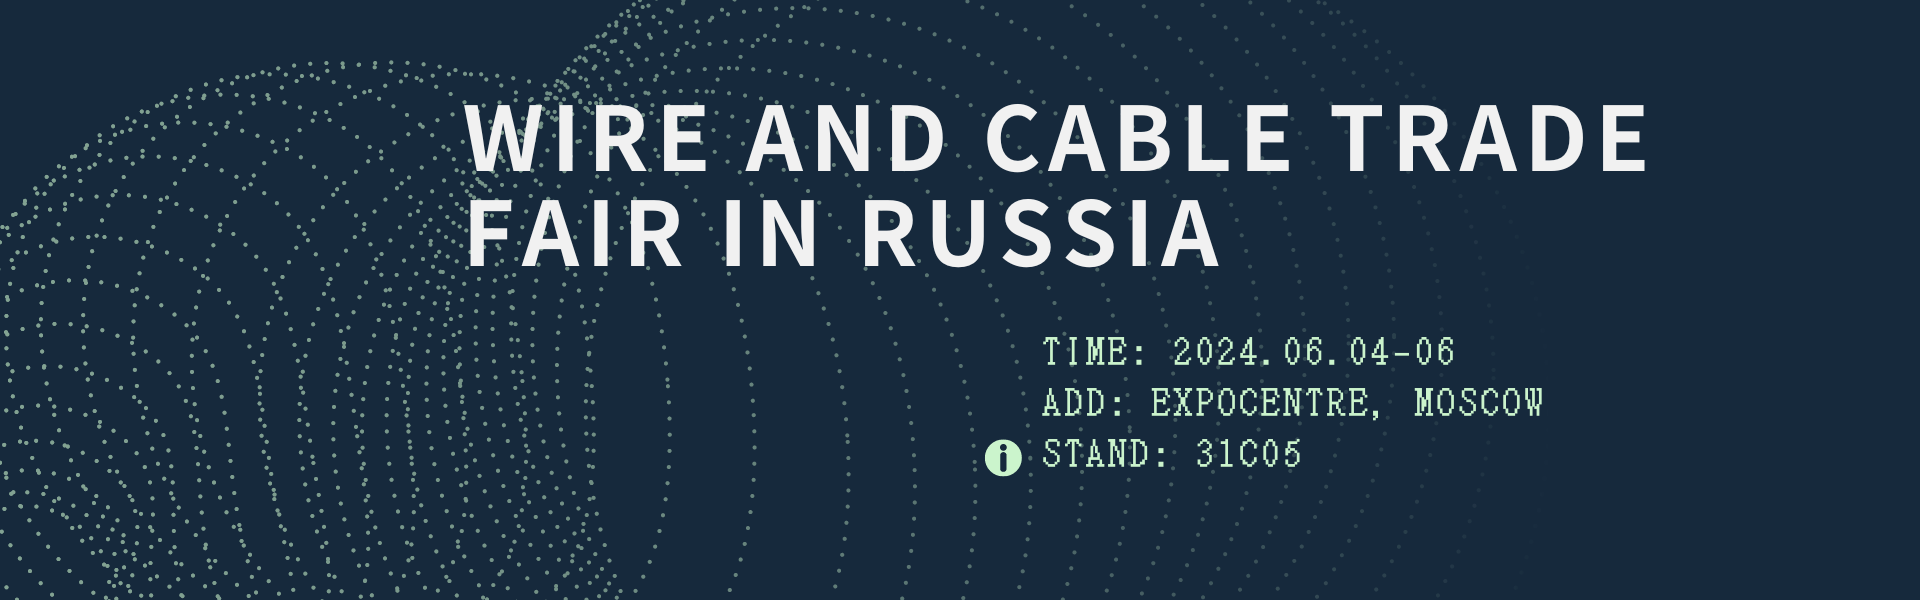 WIRE AND CABLE TRADE FAIR IN RUSSIA